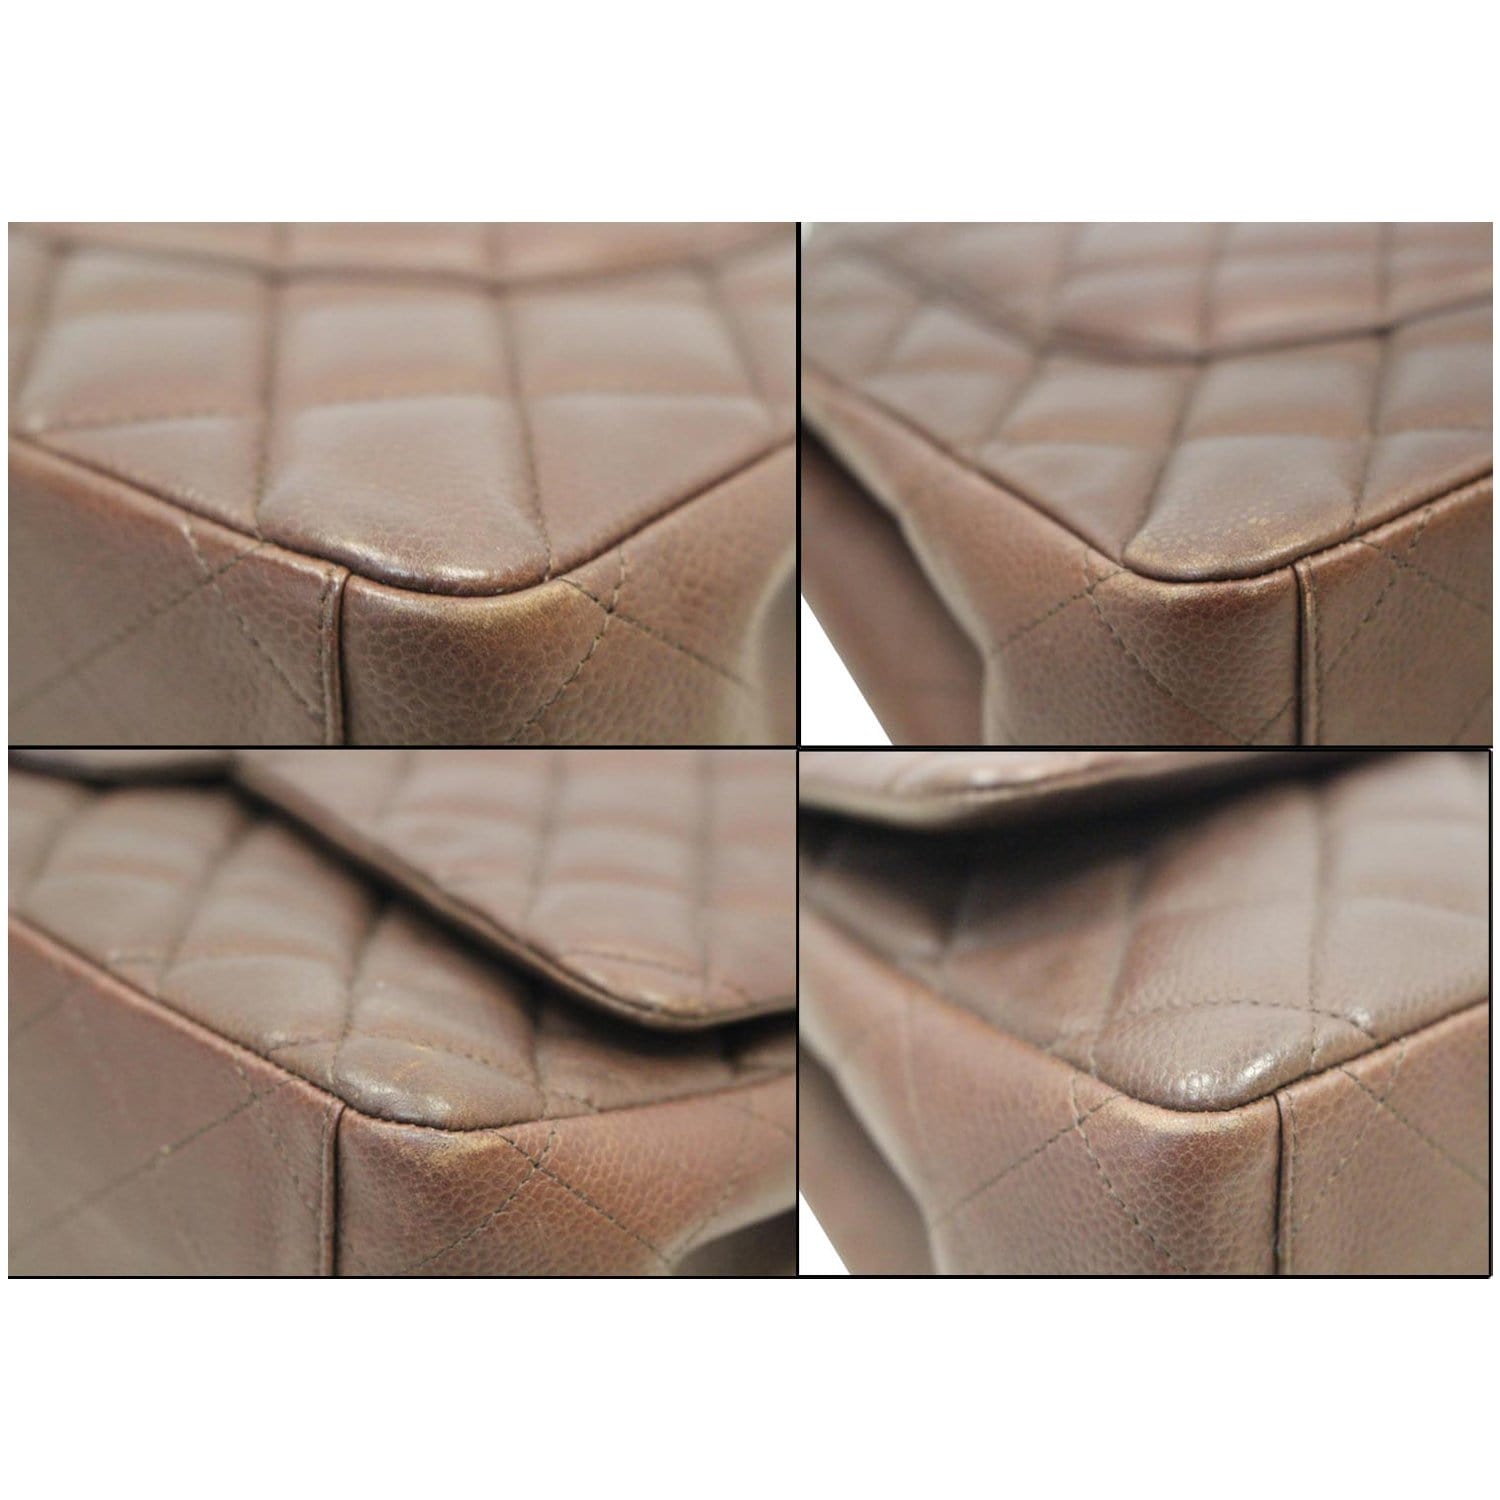 brown quilted chanel bag